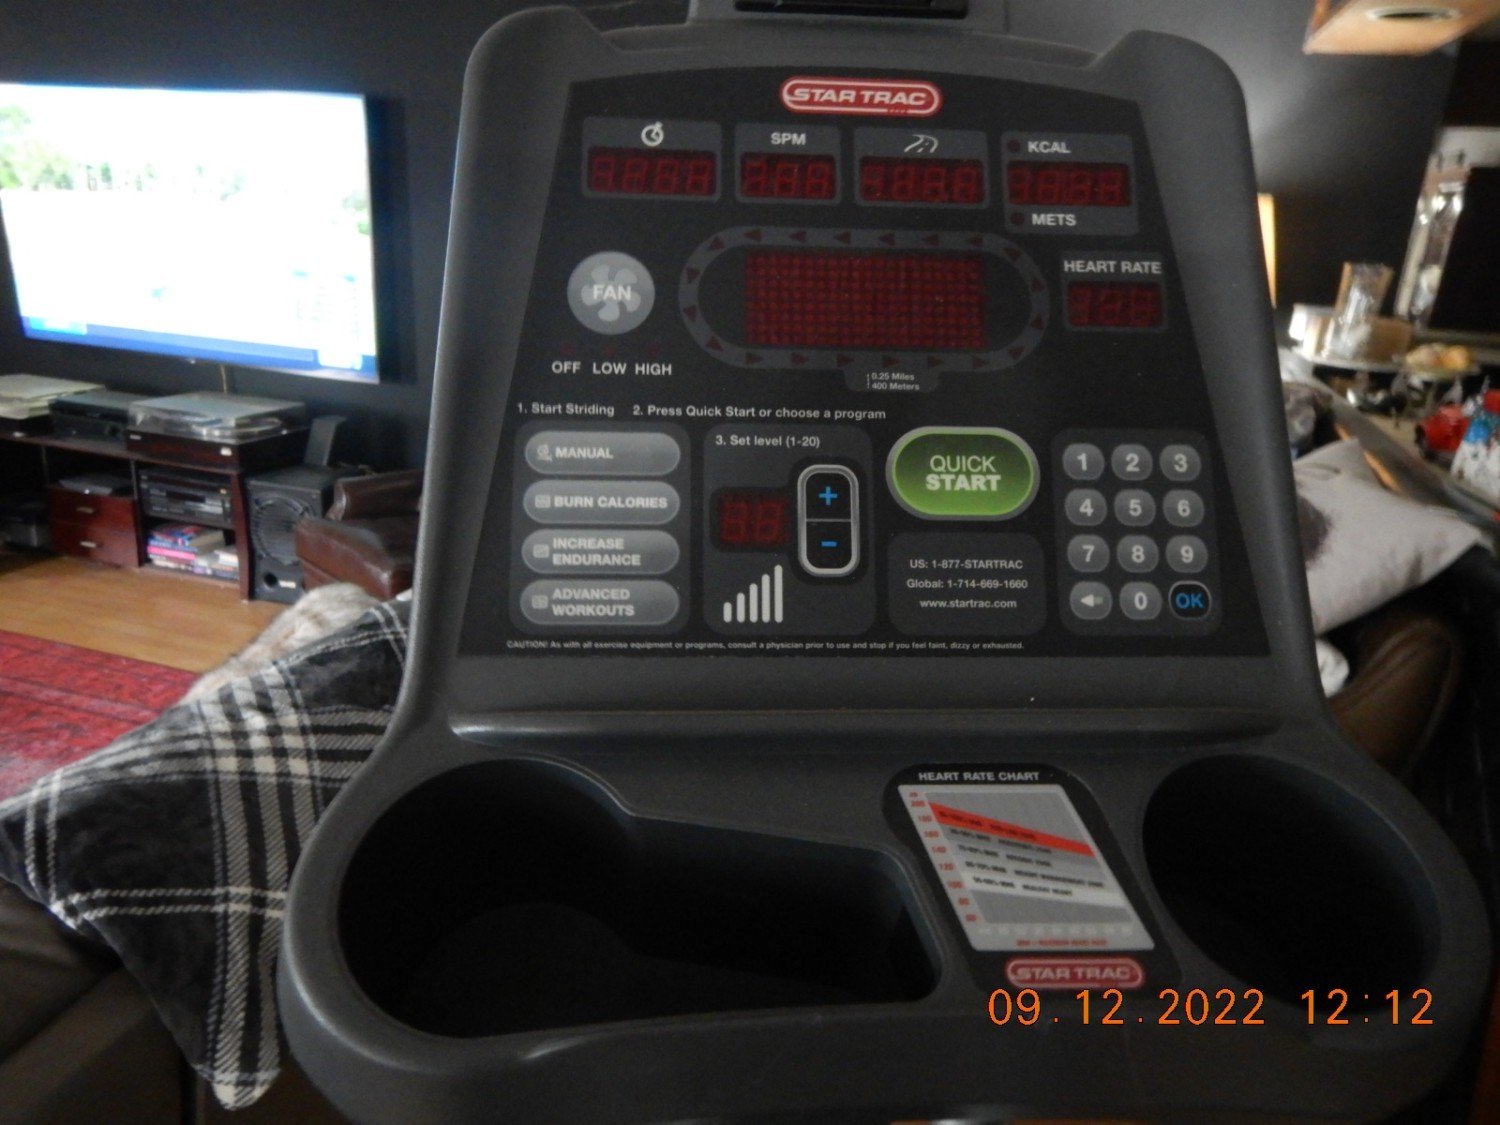 star-trac-total-body-trainer-tbt-s-series-elliptical-as-new-2000-langley-bc-big-5